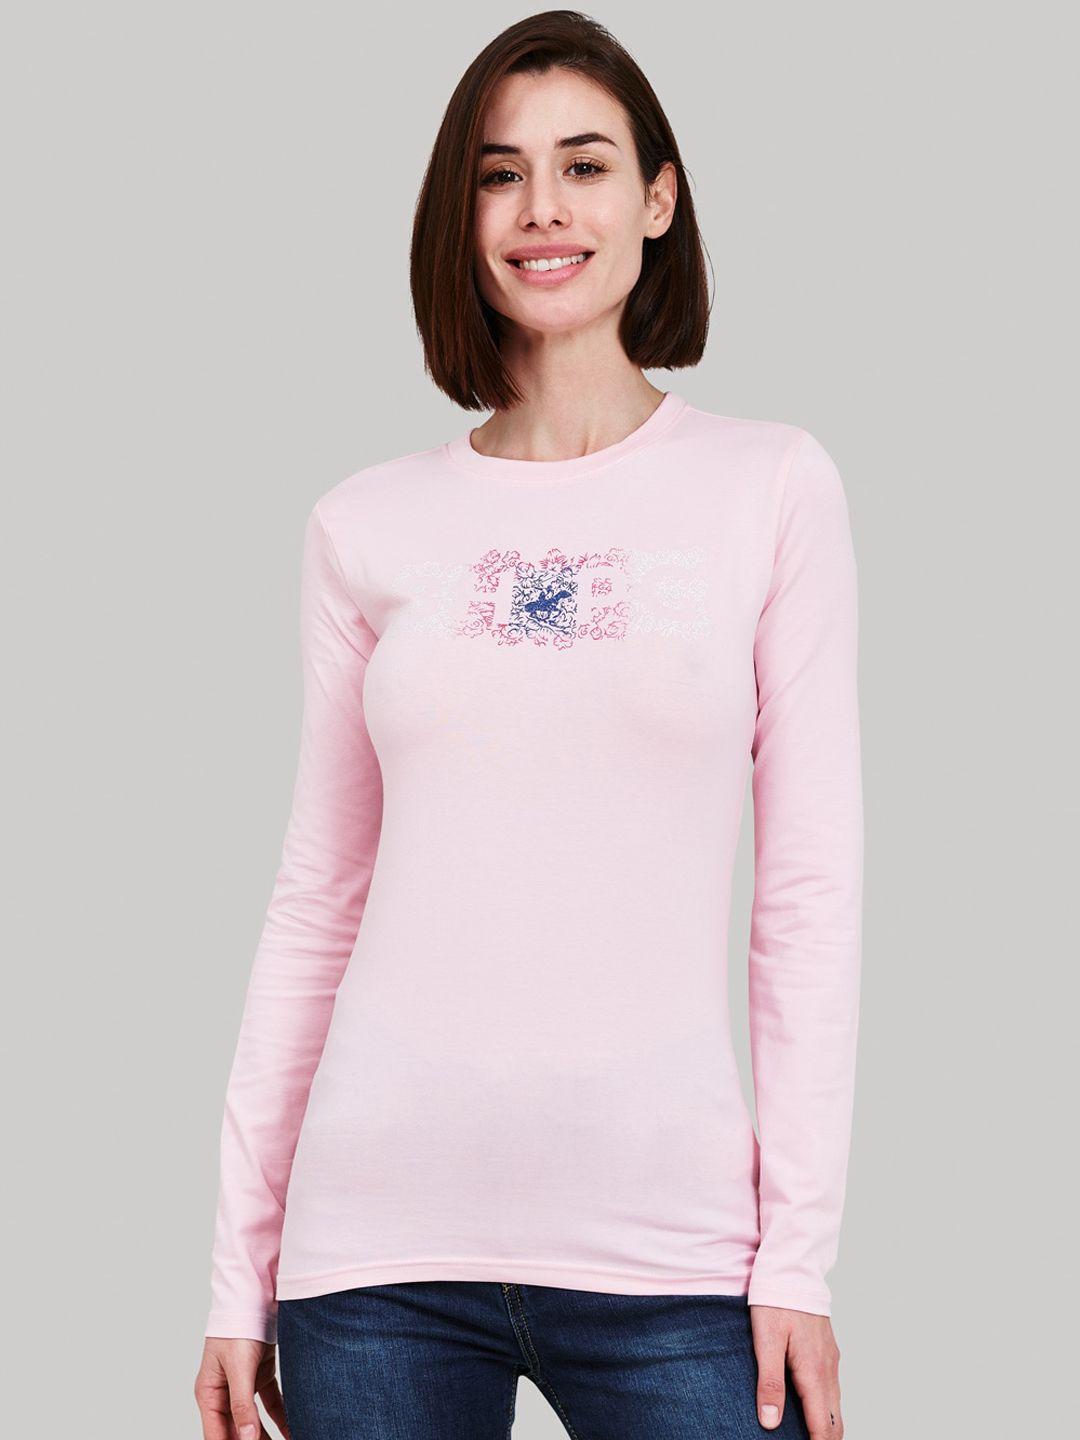 beverly hills polo club women pink printed round neck t-shirt